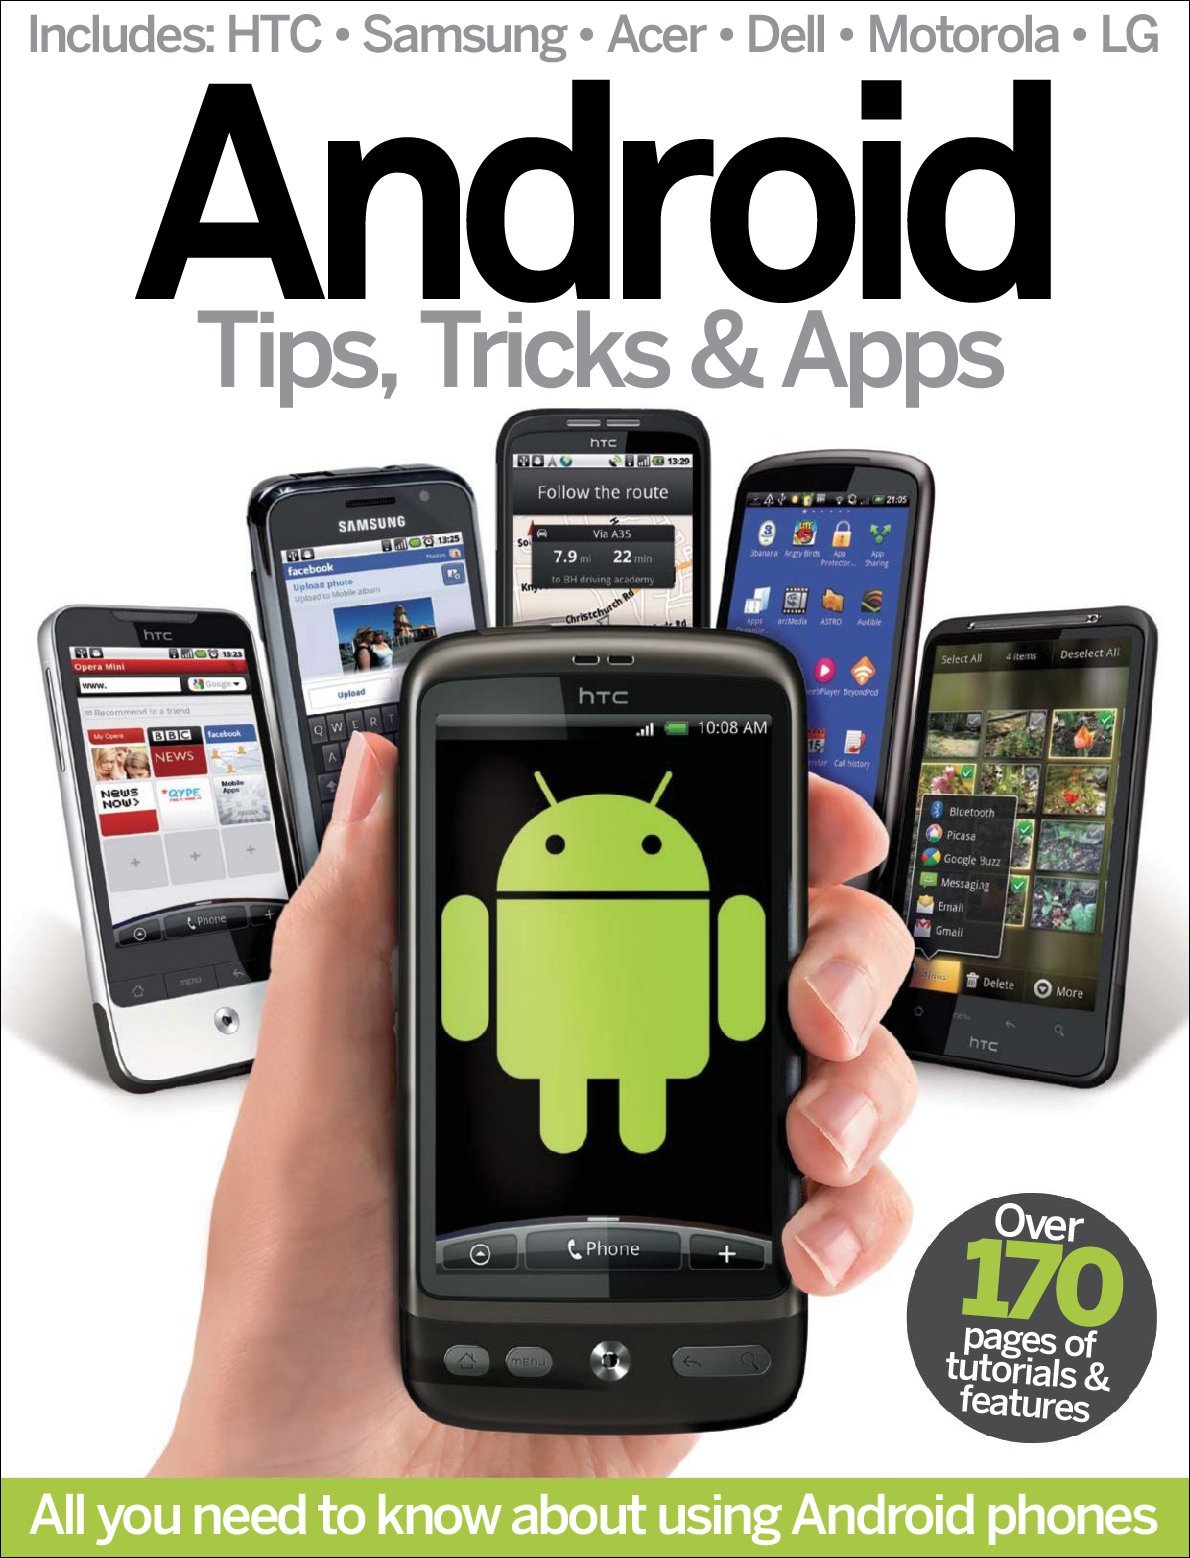 Android apps and tricks